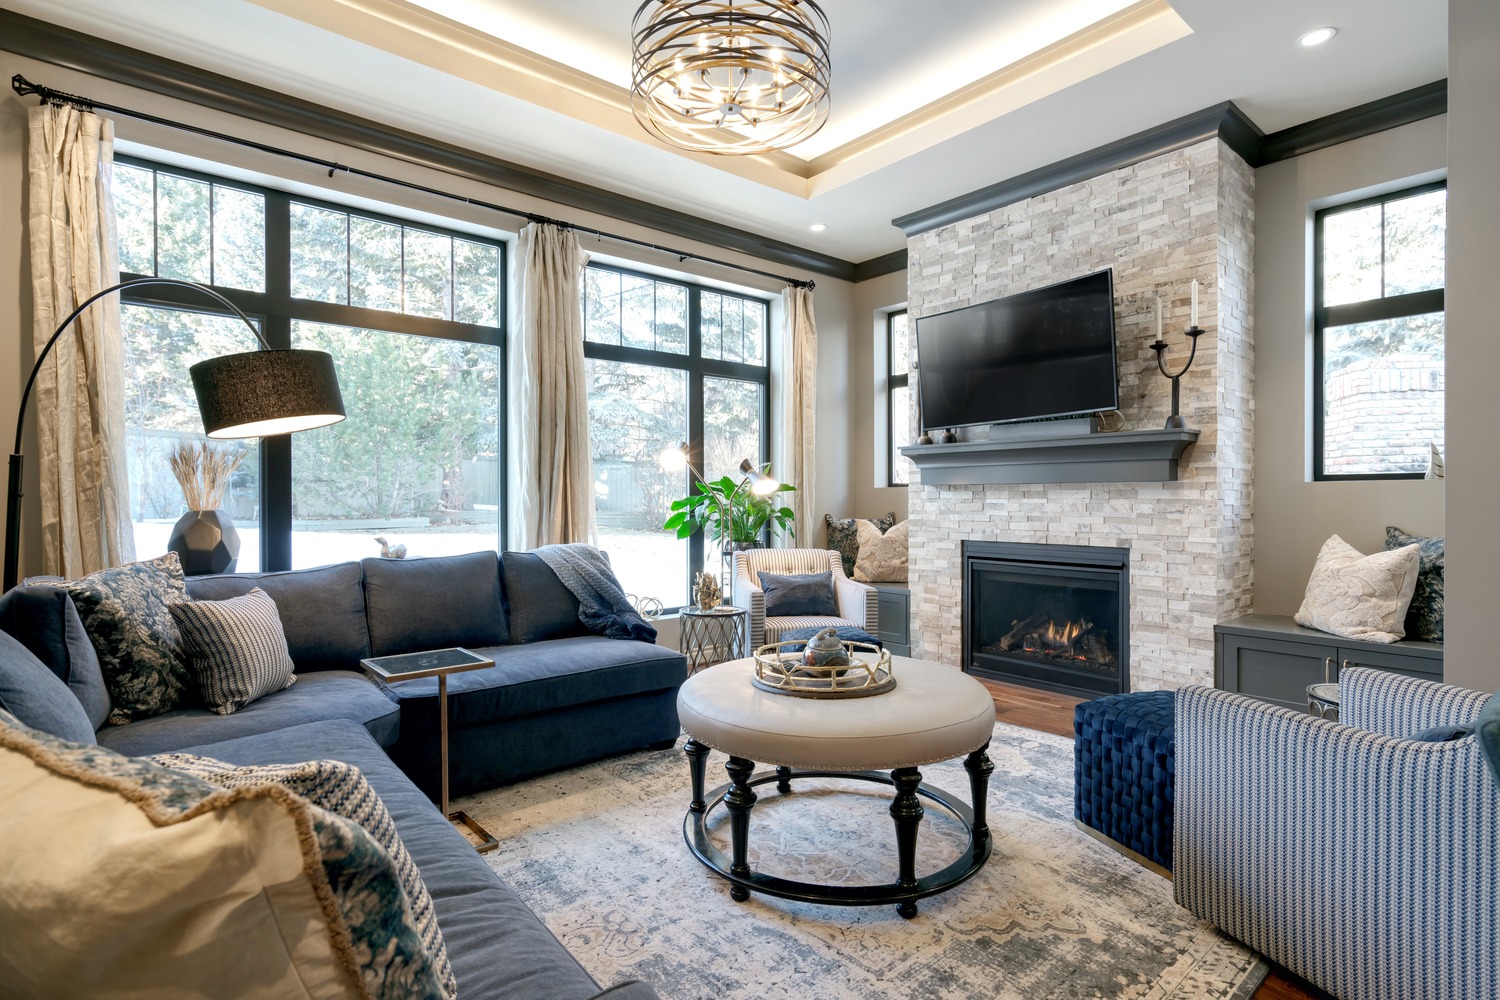 A luxuriously renovated sitting room, complete with stone fireplace and inset roof lighting, by Melanson Homes.